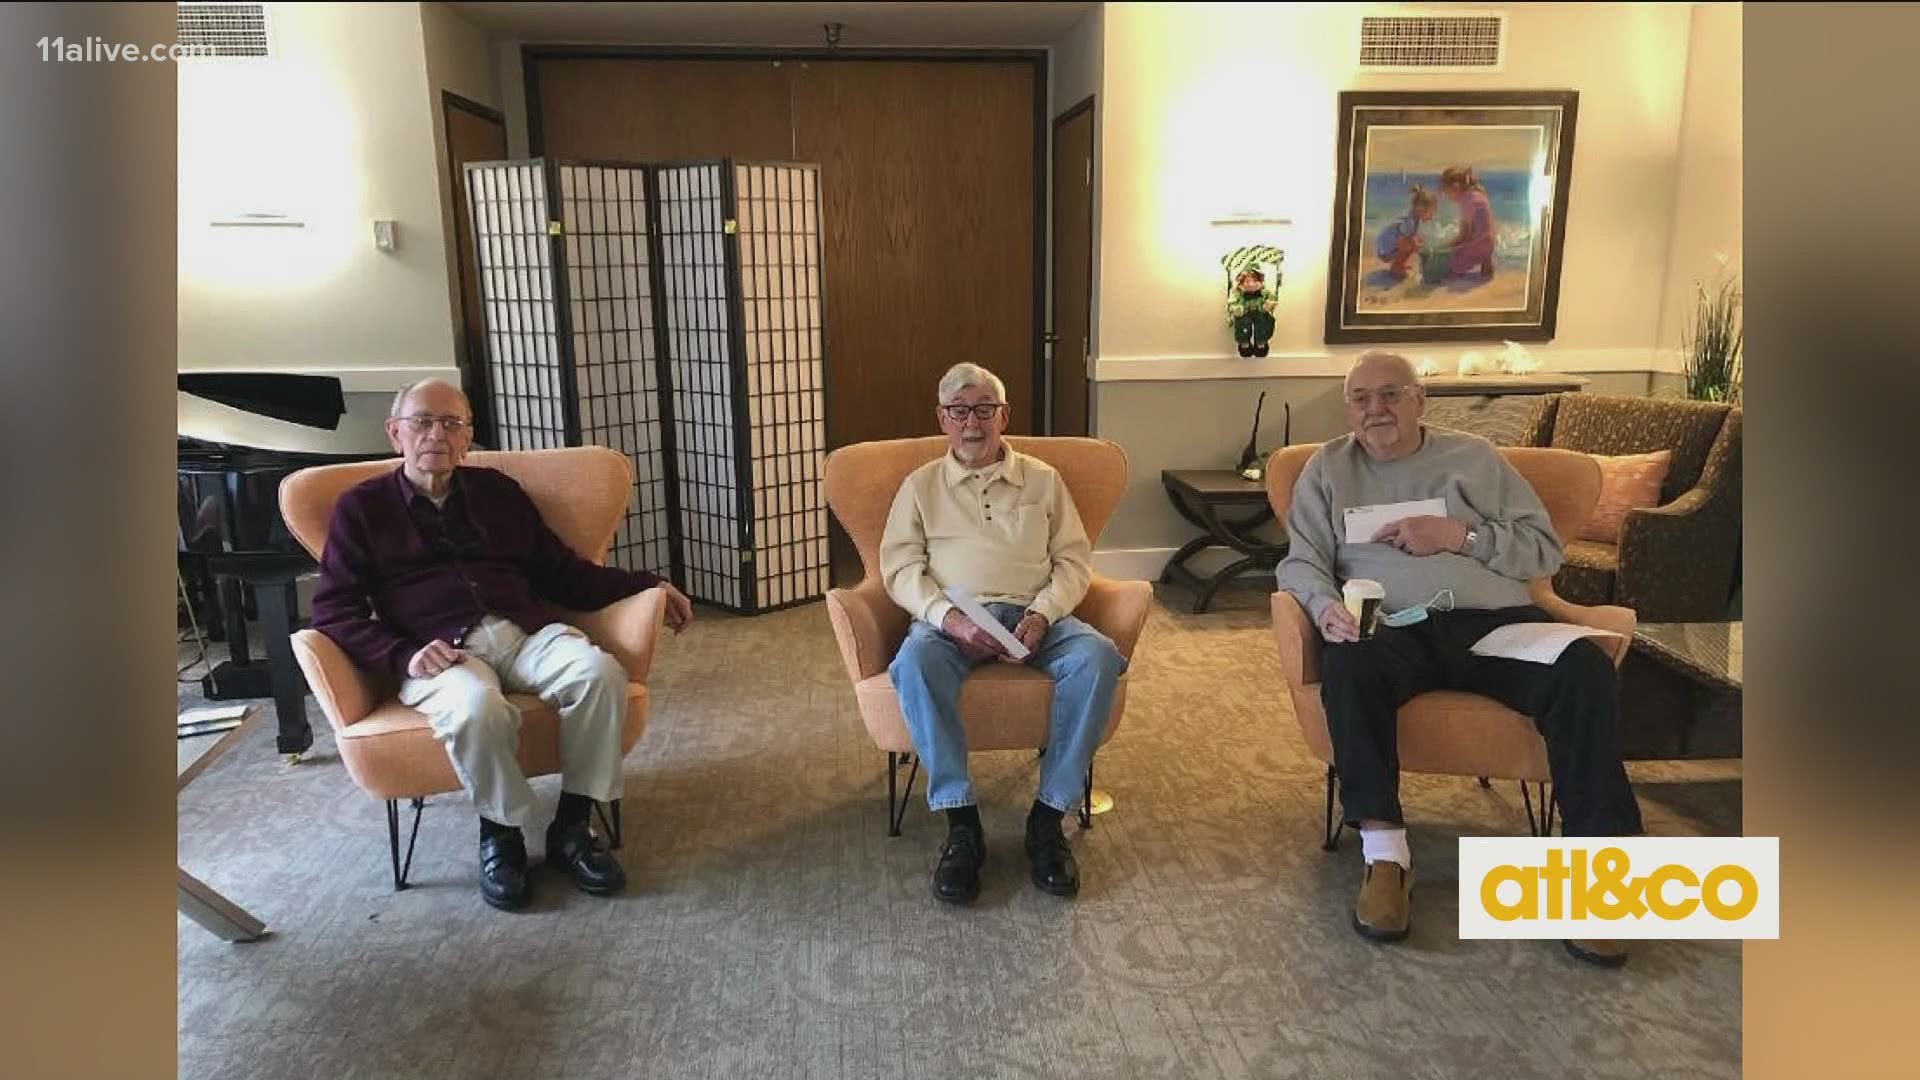 A kind-hearted travel agent helped 3 friends in their 90s go on their dream "last hurrah" boys' trip, without costing the veteran pilots a dime.